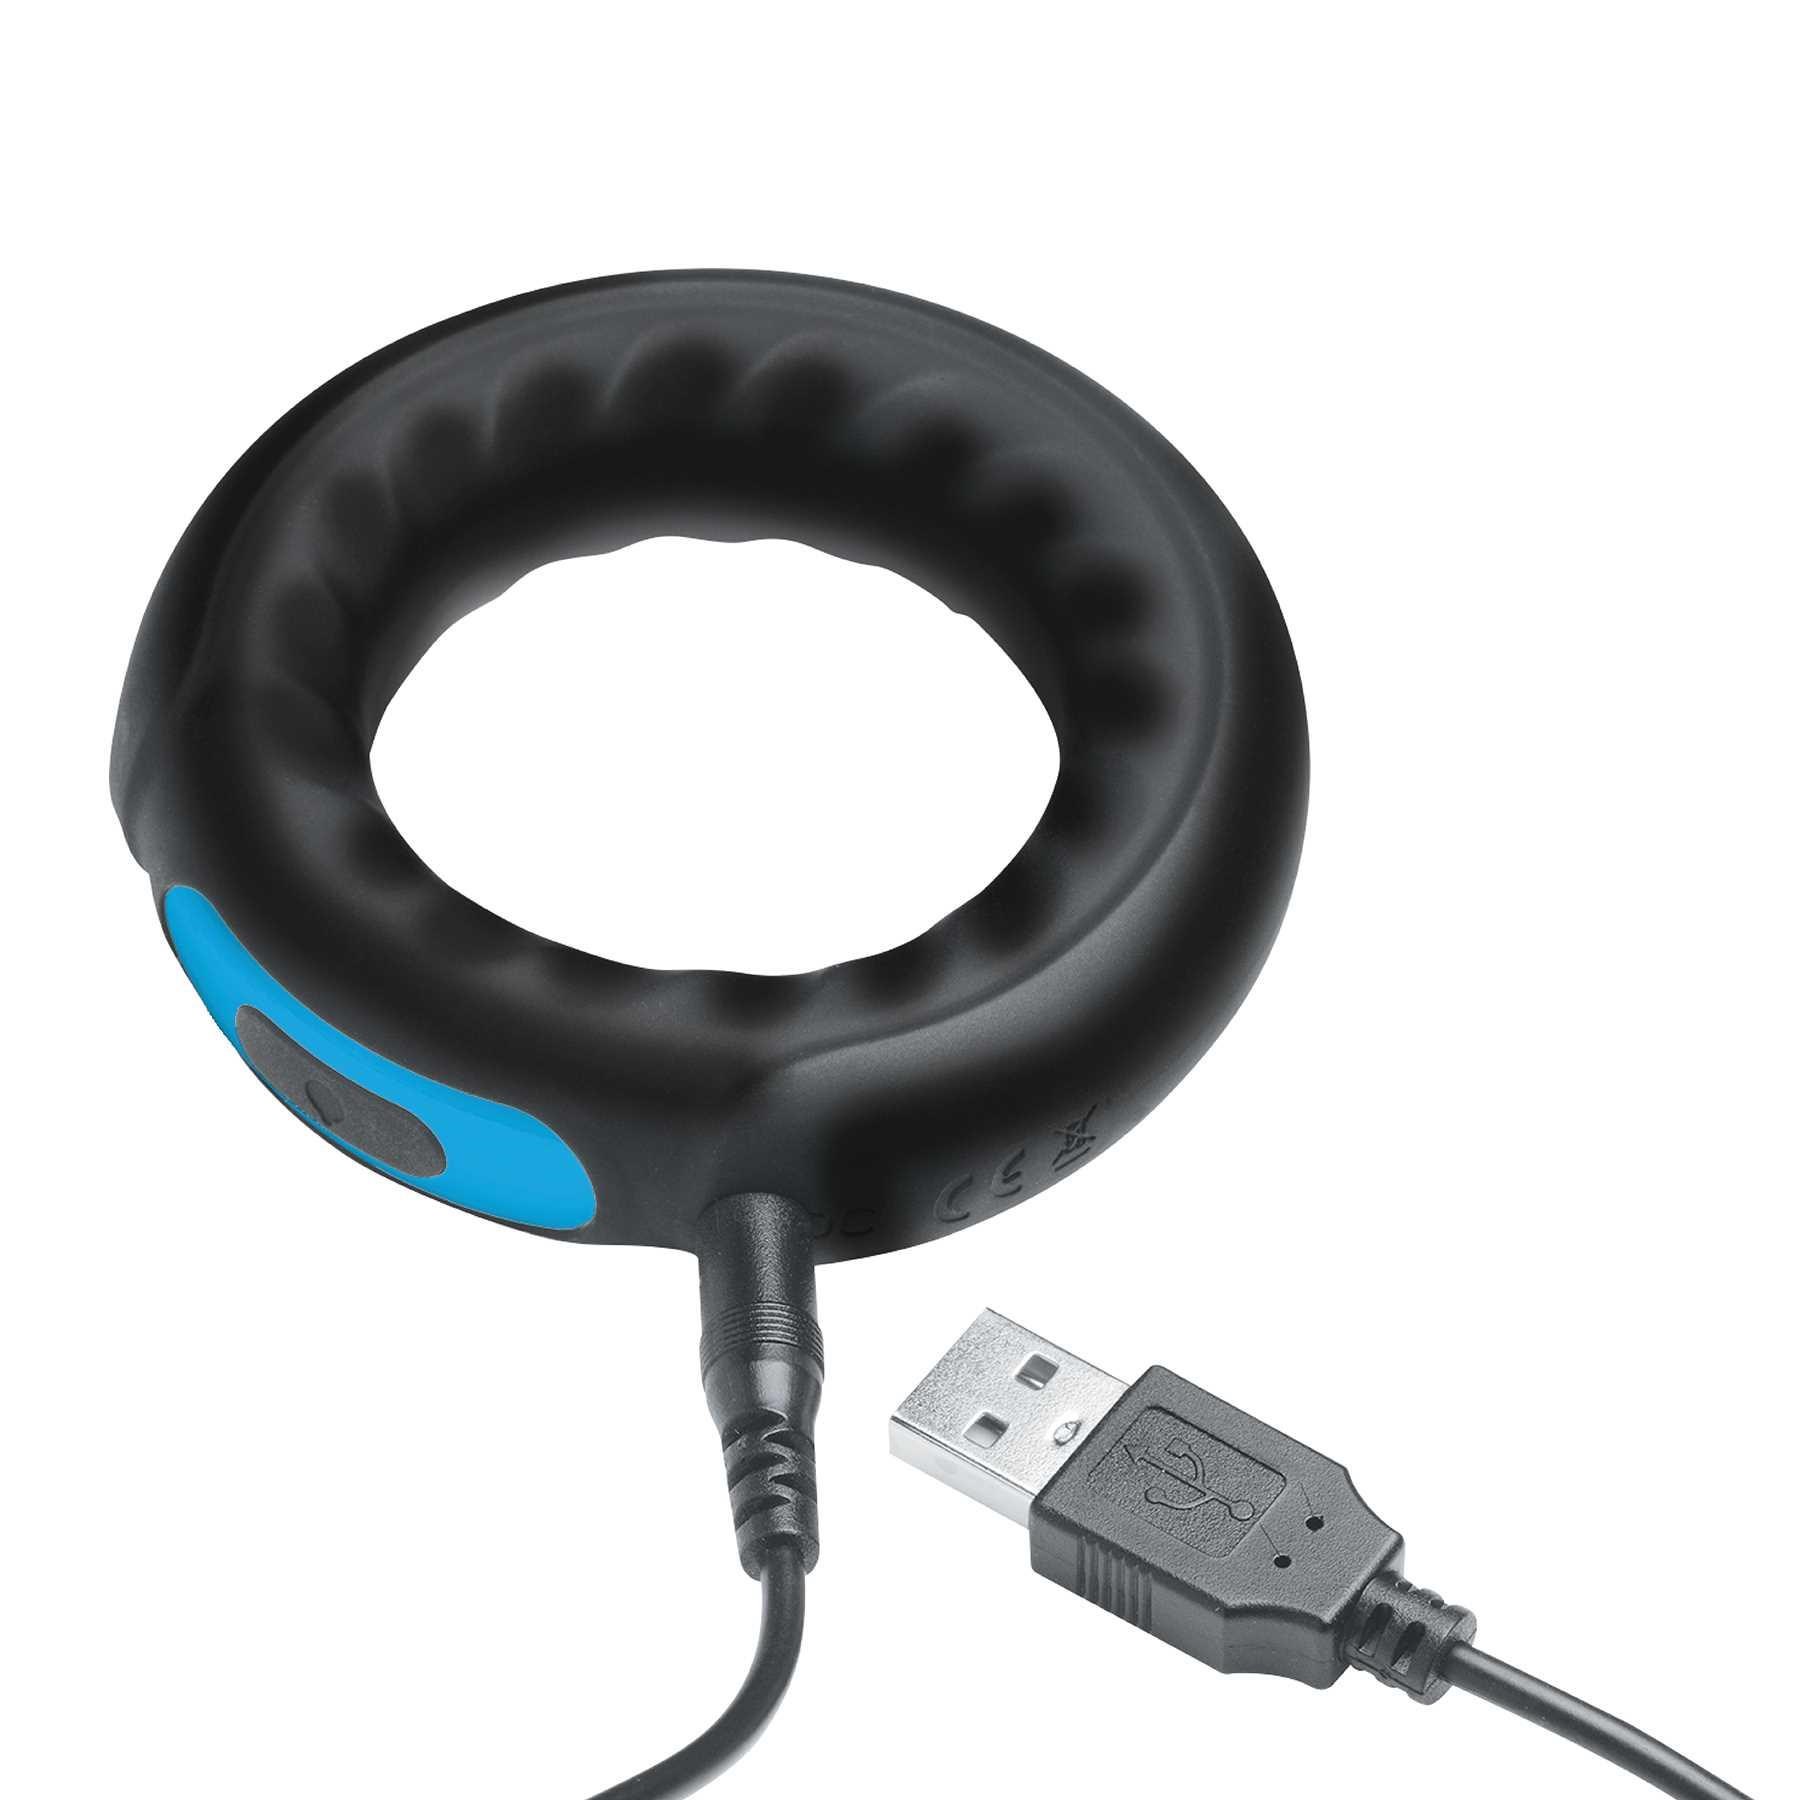 Power Performance Ring with USB charger plugged into  toy